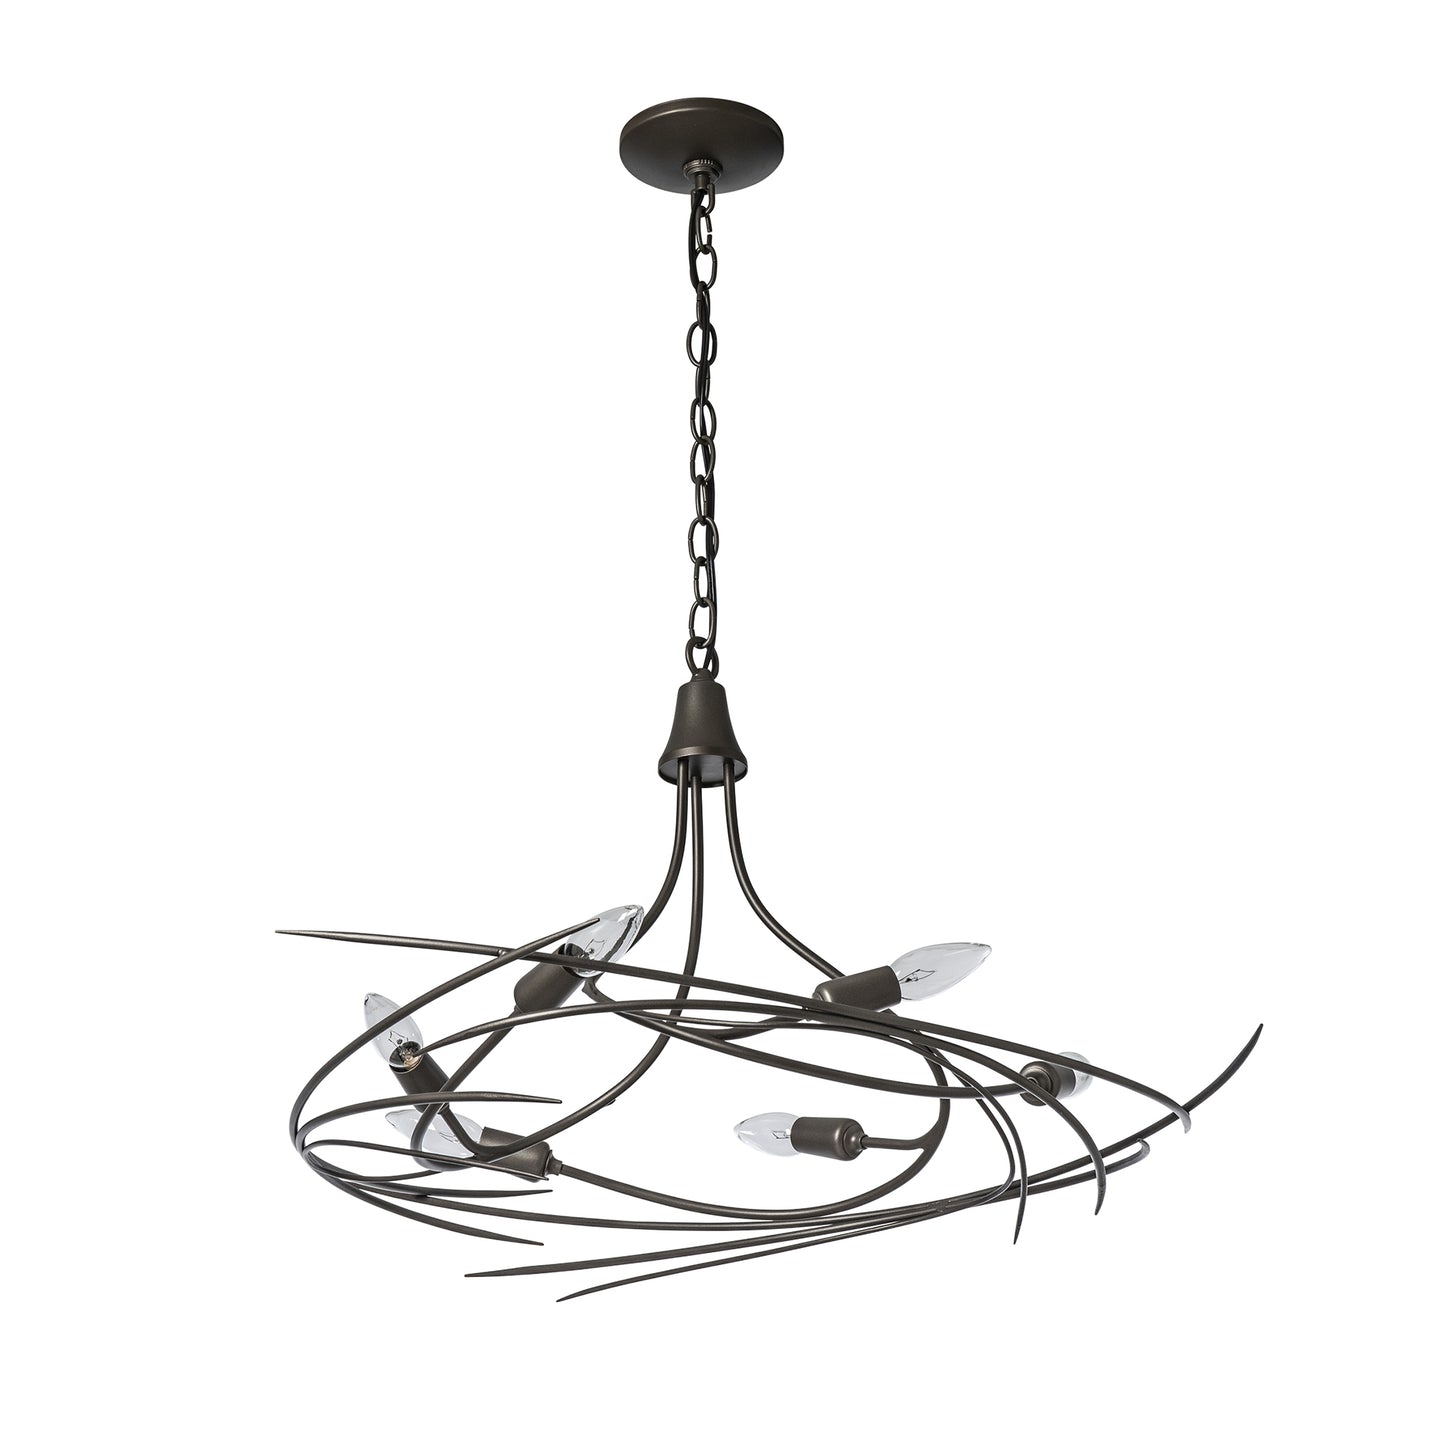 The Hubbardton Forge Wisp 6-Light Chandelier showcases an elegant silhouette with a metal frame and a glass shade, embodying fine tailoring.